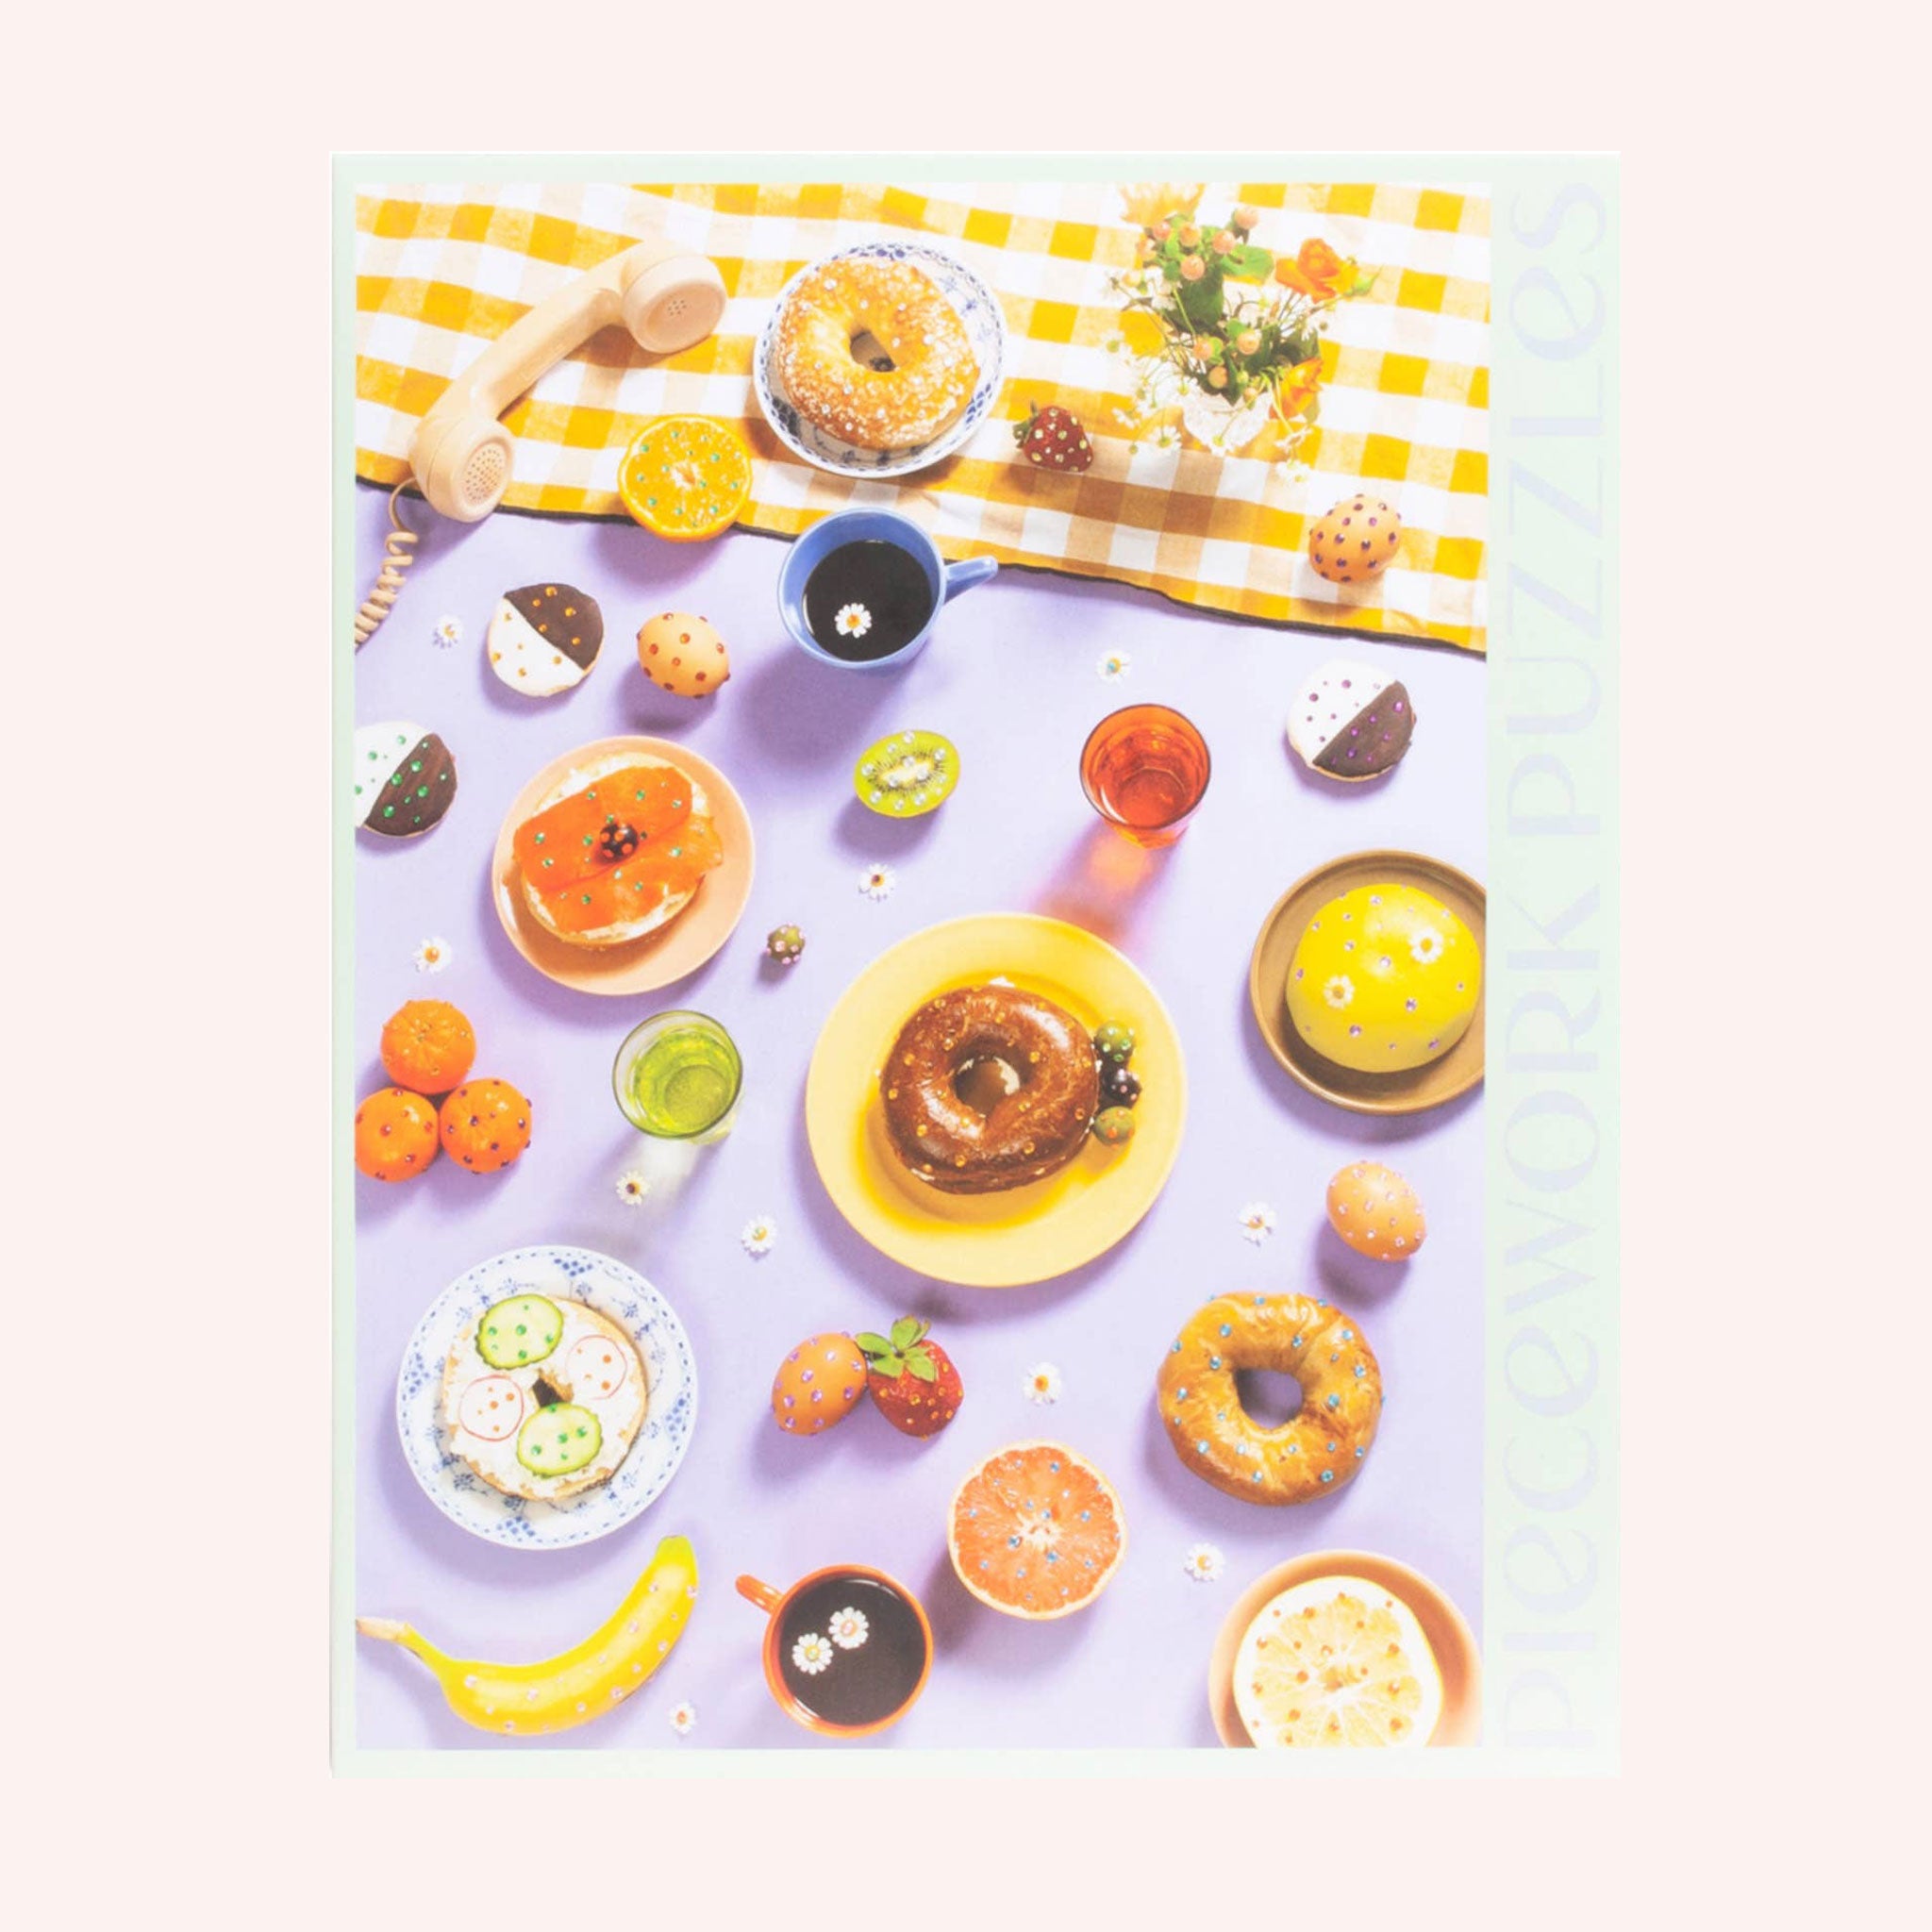 A look at what the completed puzzle looks like which is an array of bedazzled breakfast items including bagels, fruits, sunny side up eggs and more. The primary color tones of this puzzle include shades of light purple, yellow and orange.